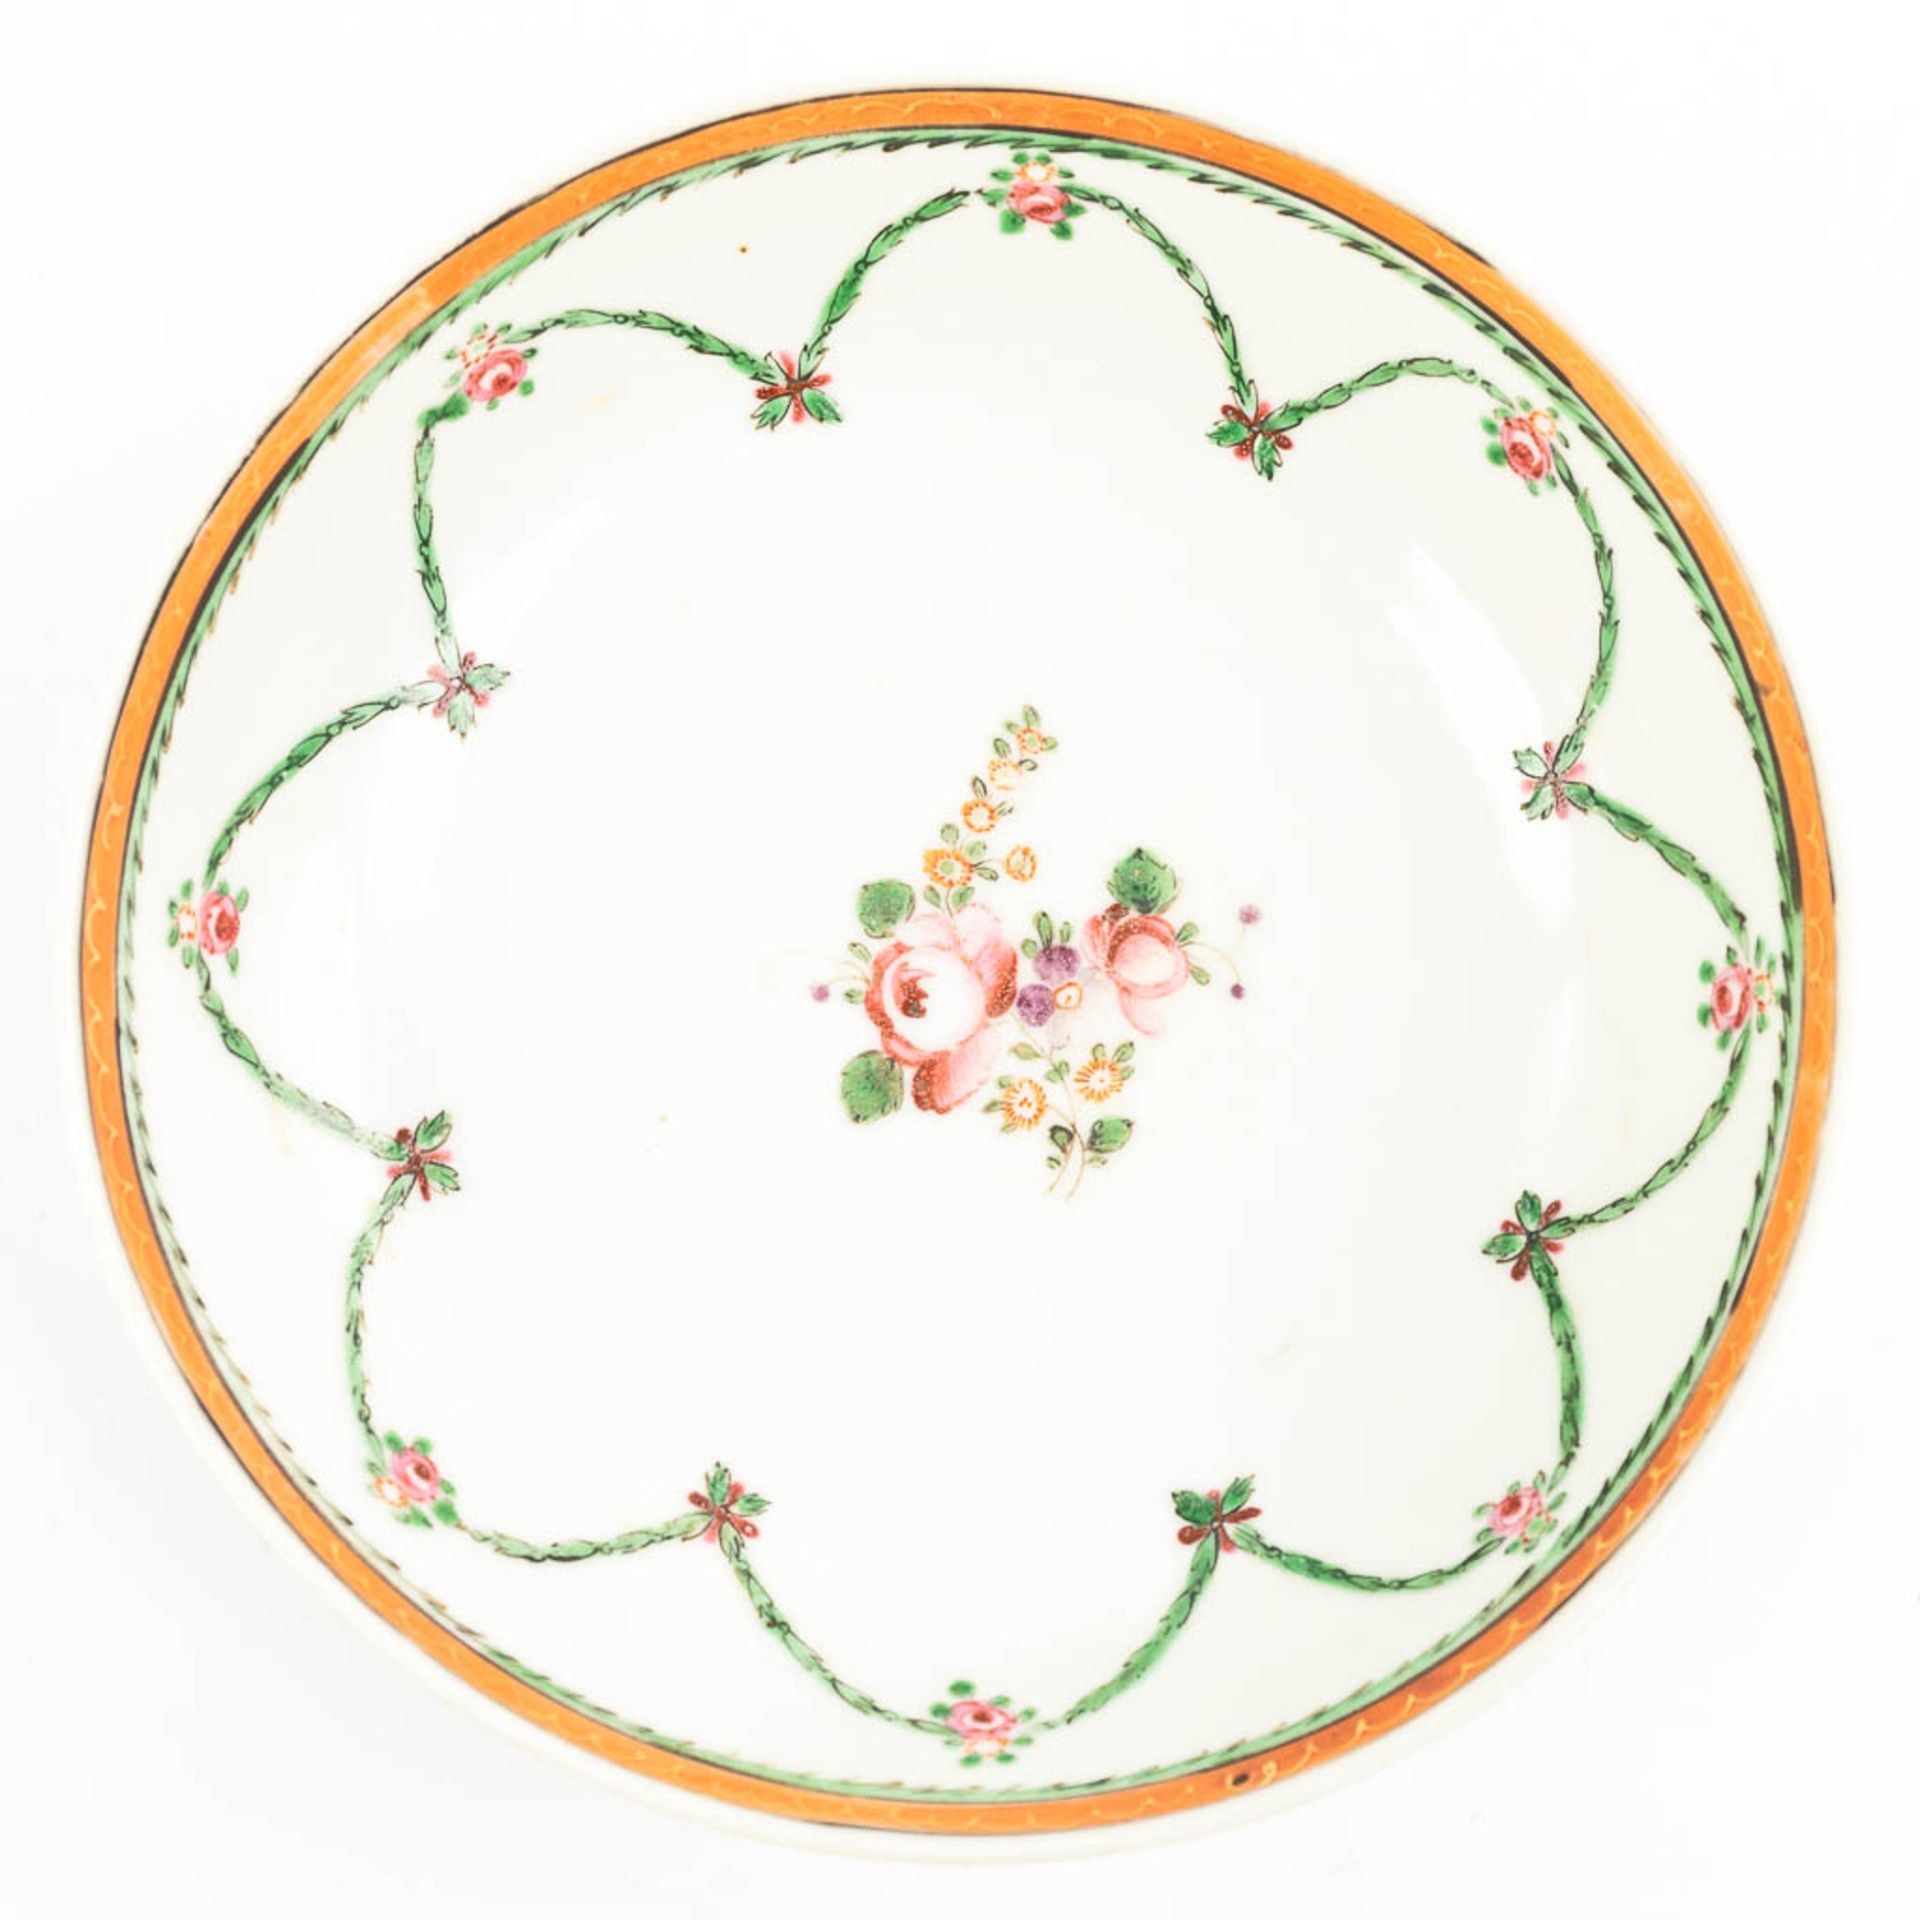 A collection of 5 plates made of Chinese porcelain with different patterns. - Image 11 of 15